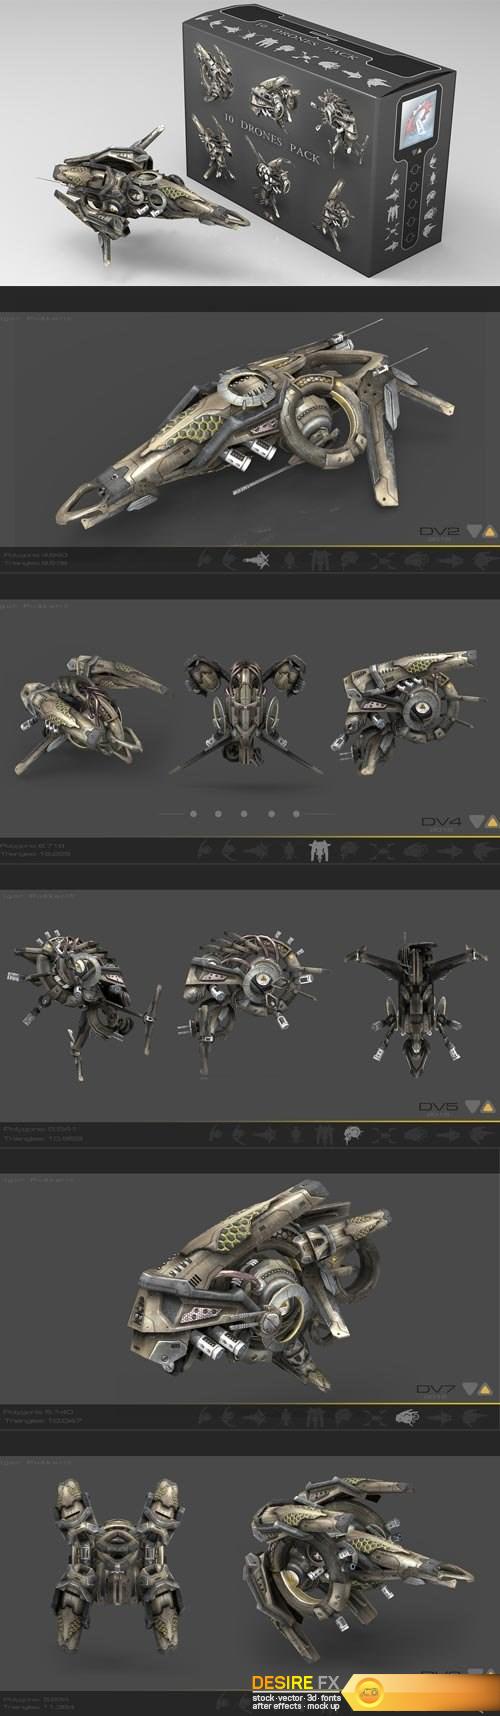 Cube Brush - 10 Drone SciFi Pack